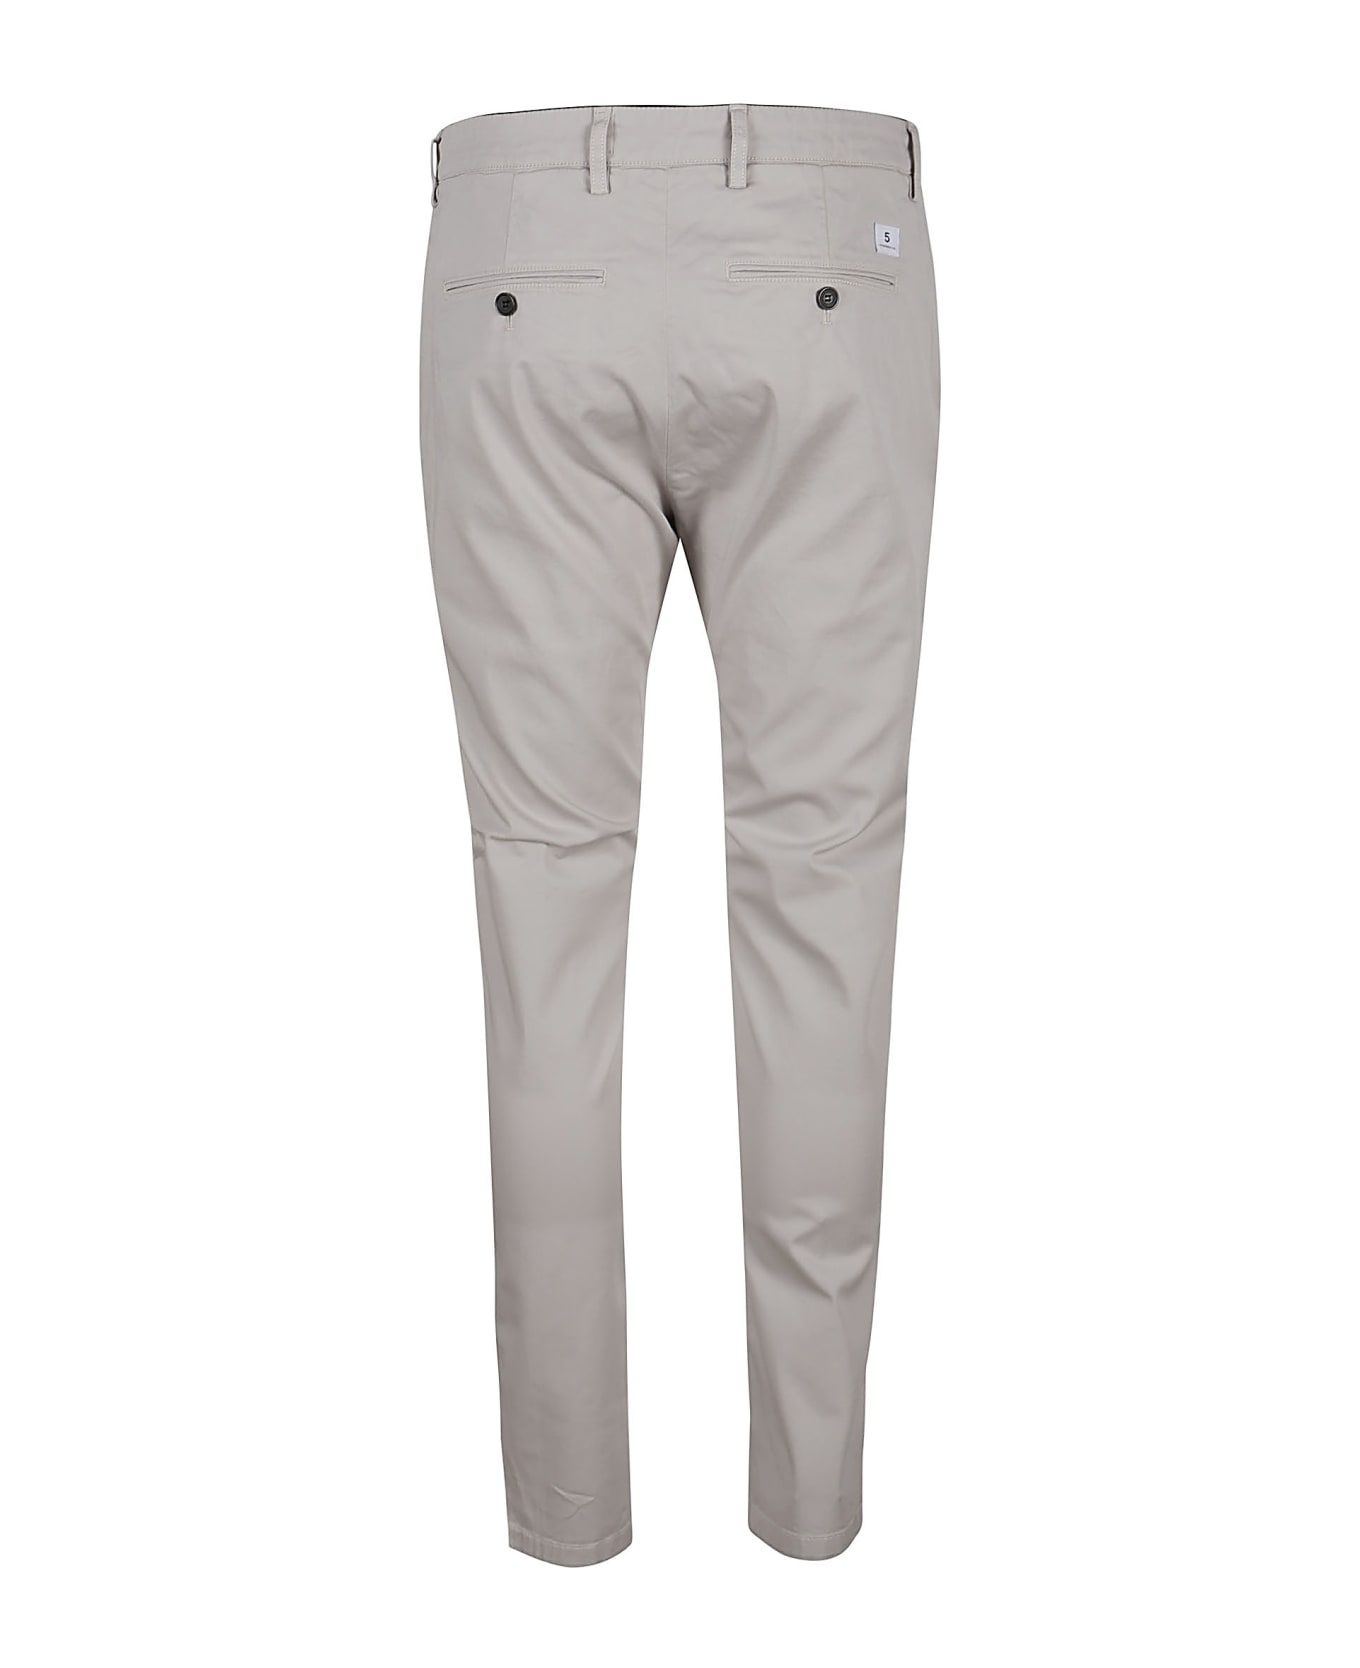 Department Five Mike Chinos Superslim Pant - Stucco